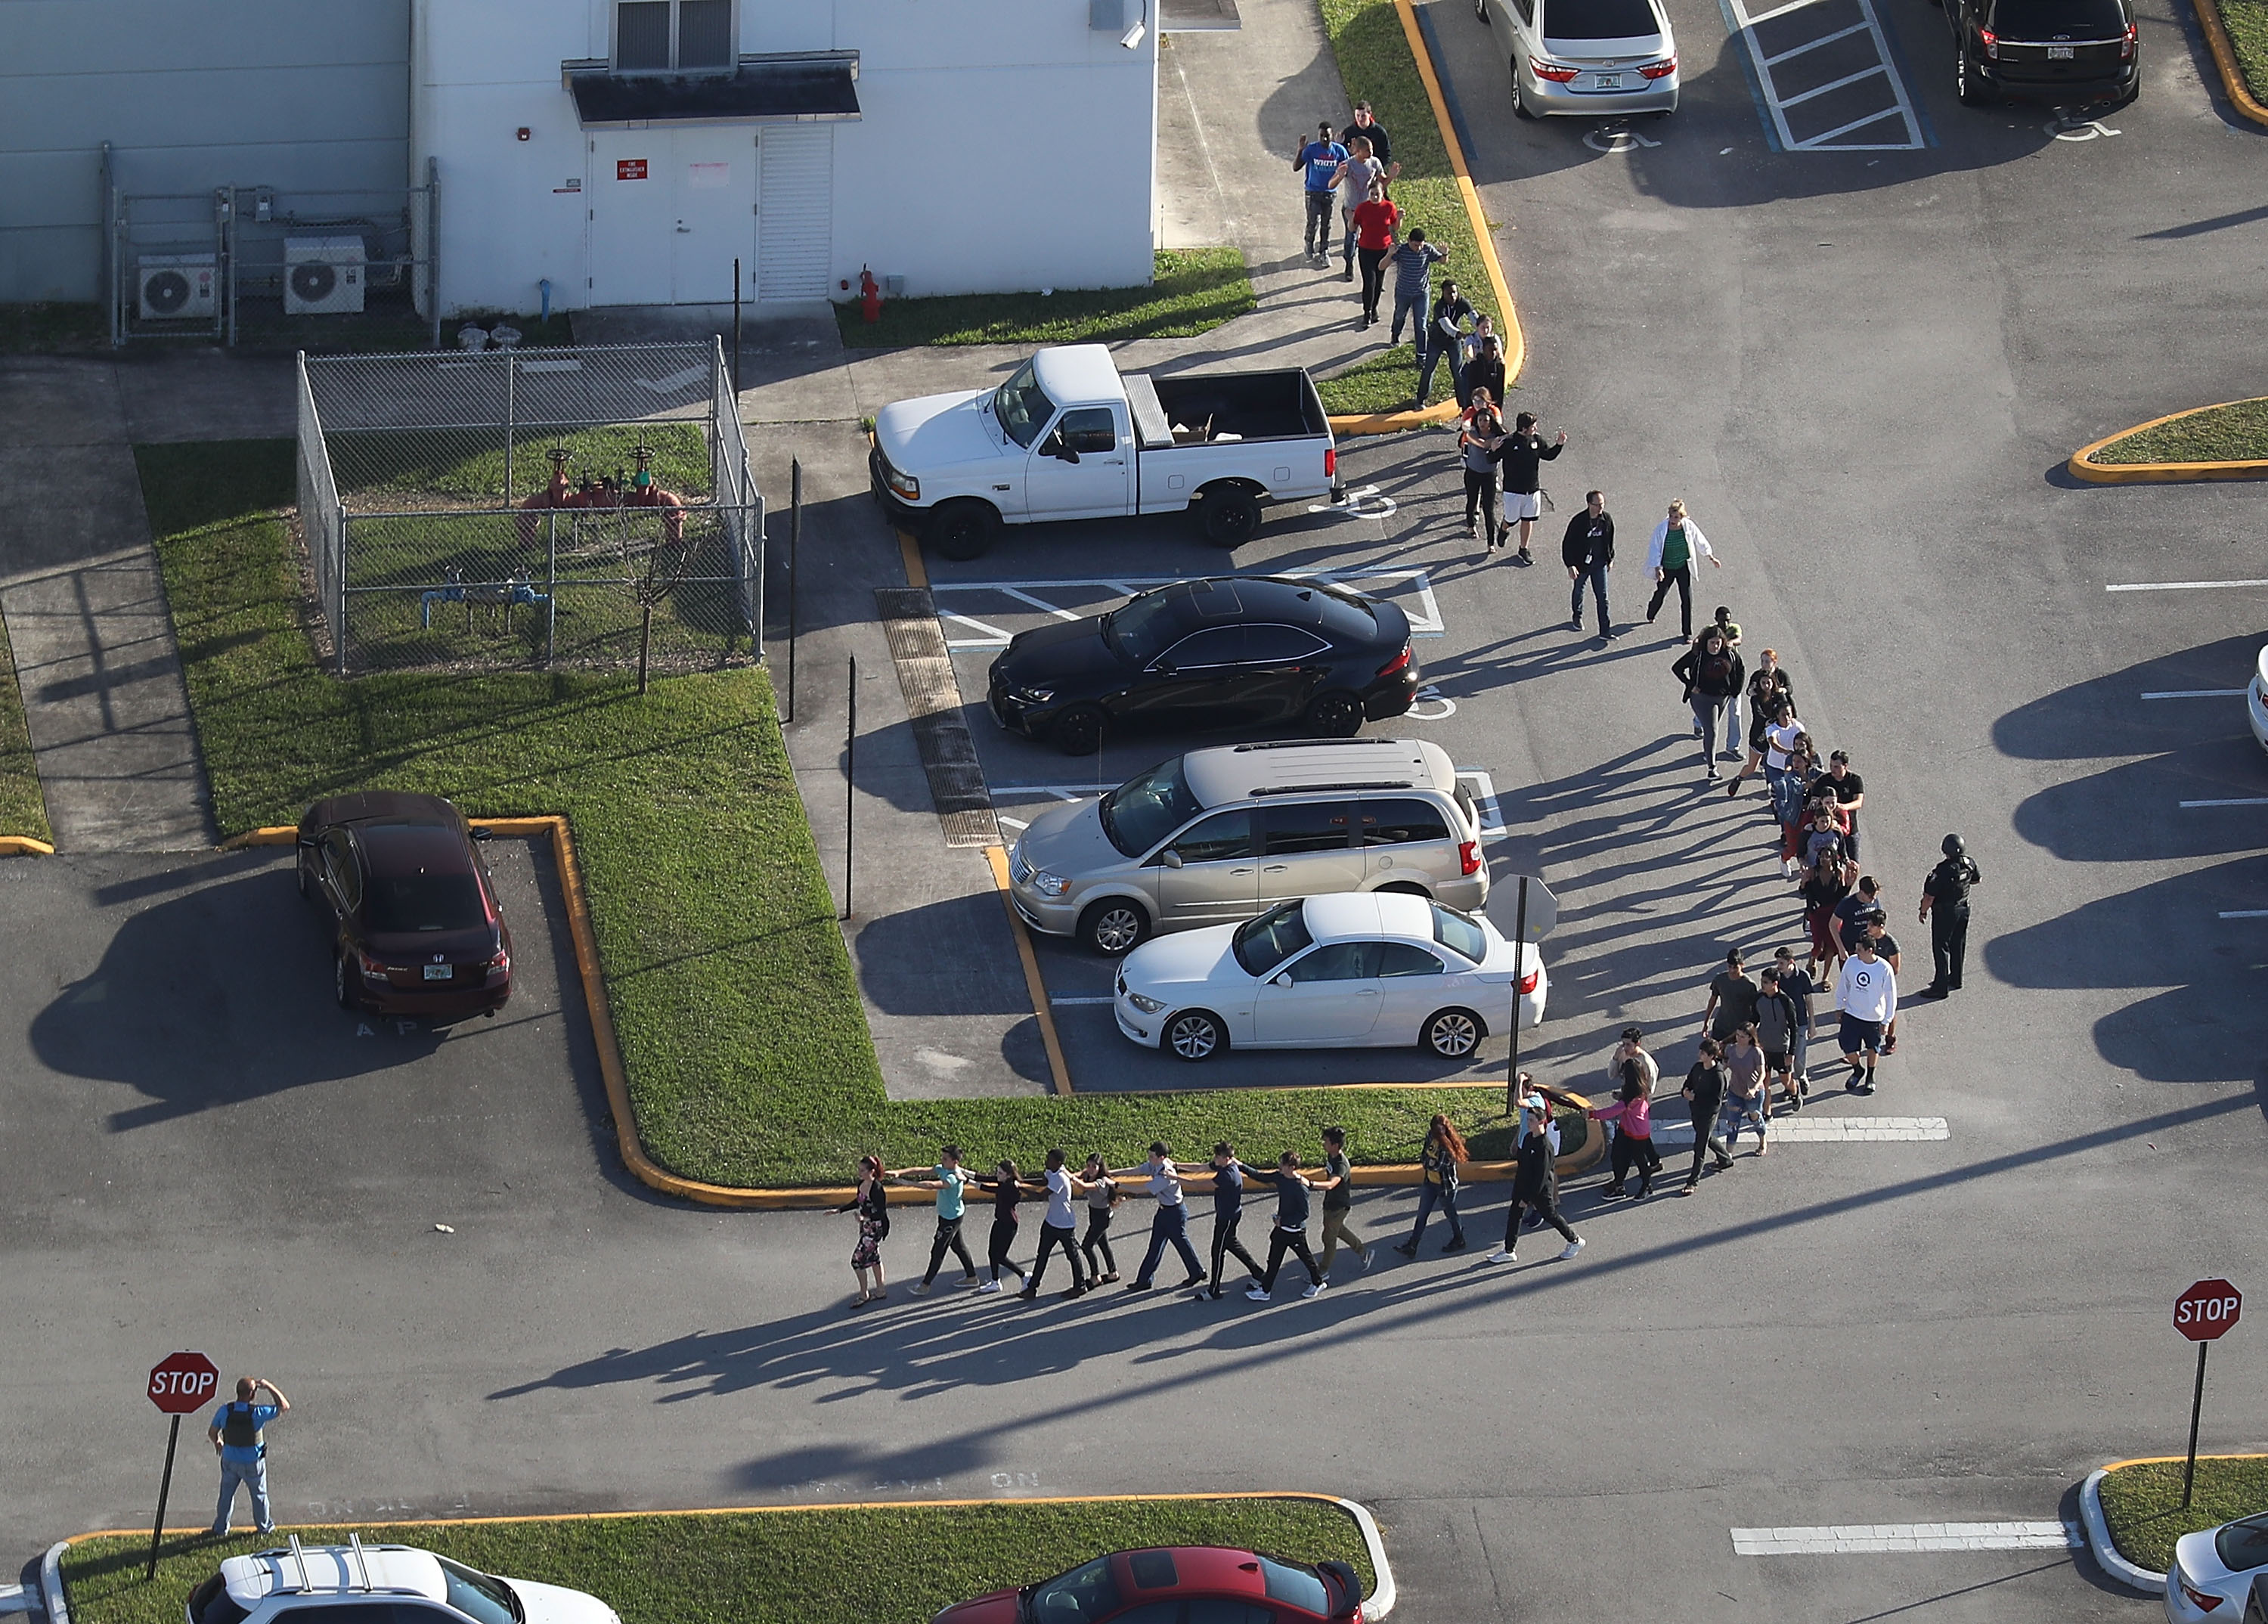 People are brought out of the Marjory Stoneman Douglas High School after a shooting at the school that reportedly killed and injured multiple people on February 14, 2018 in Parkland, Florida. (Photo by Joe Raedle/Getty Images)